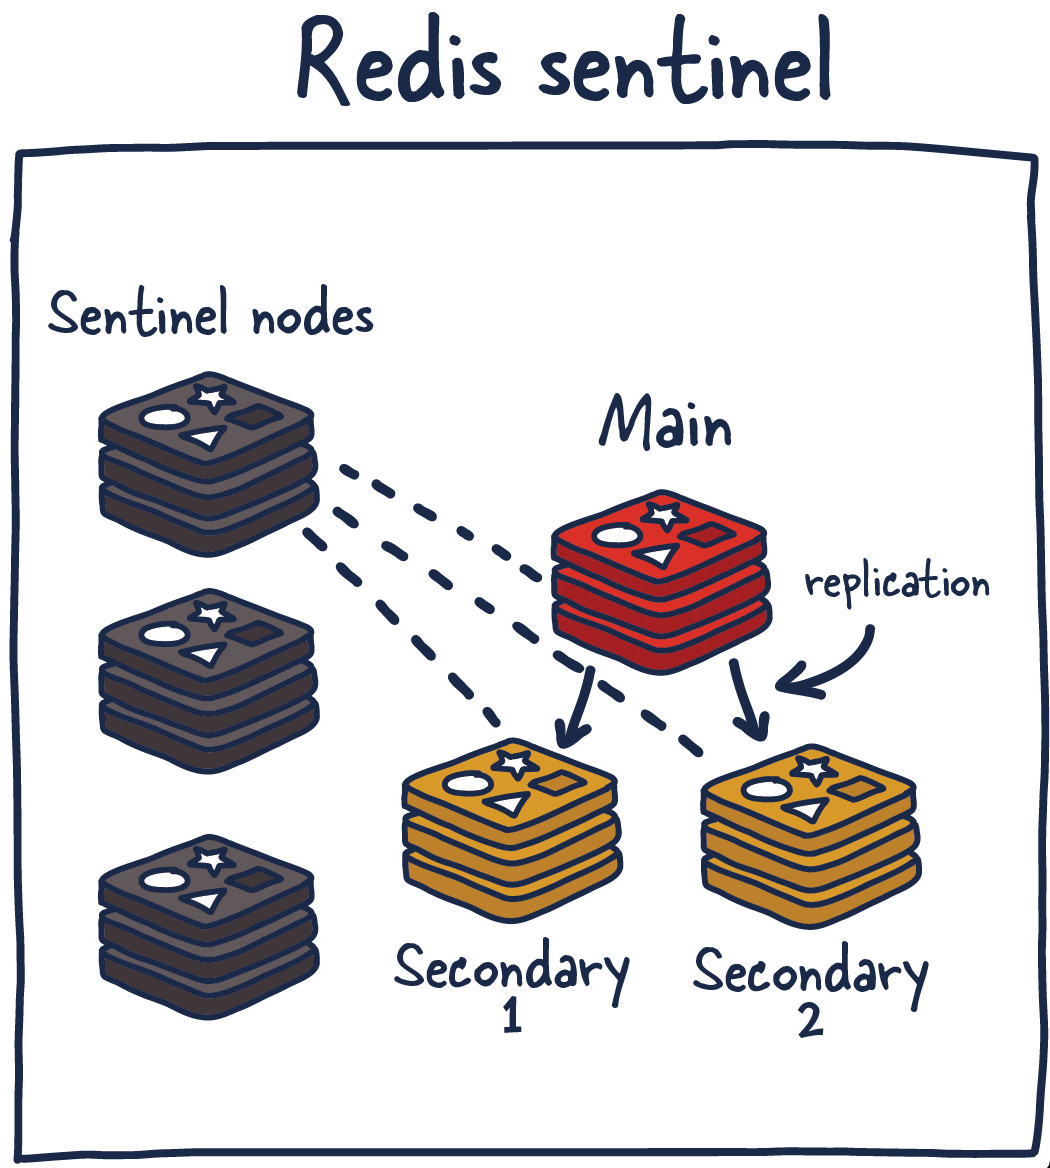 Redis Sentinel deployment (extra monitoring/dashed lines from other sentinel nodes are left out for clarity).